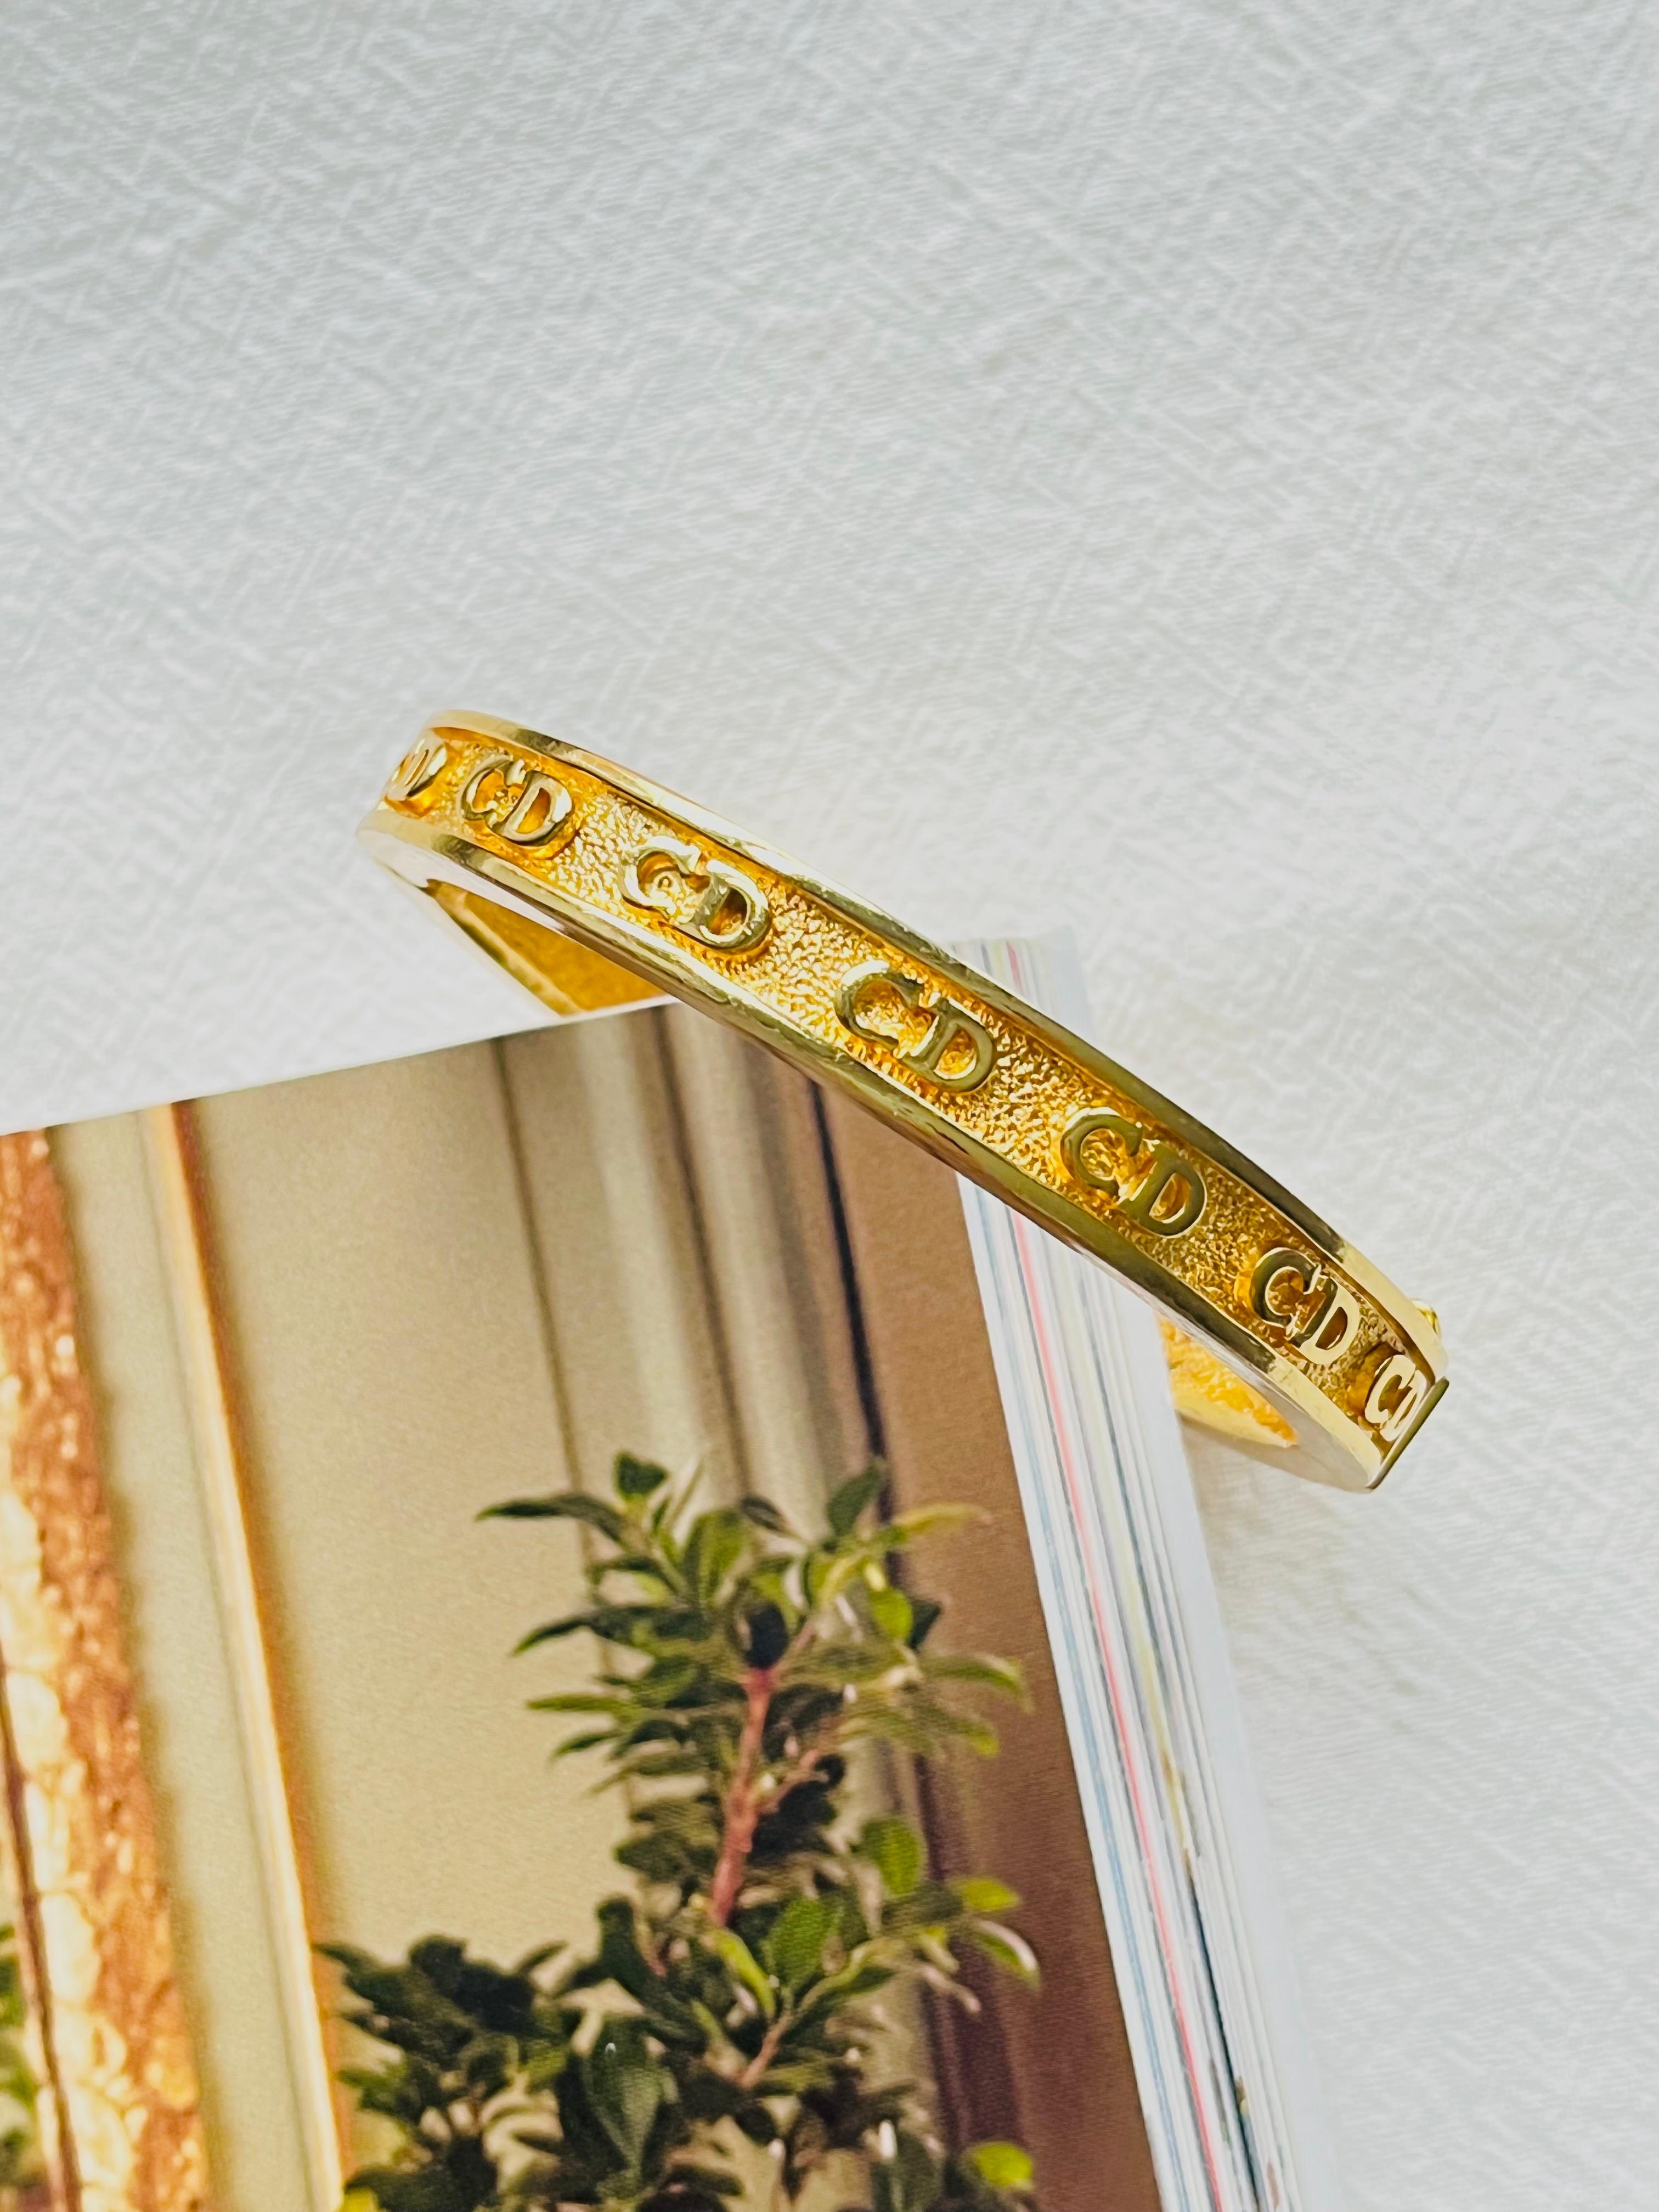 Christian Dior Vintage 1980s Monogram Logo CD Classic Gold Cuff Bangle Bracelet In Good Condition For Sale In Wokingham, England